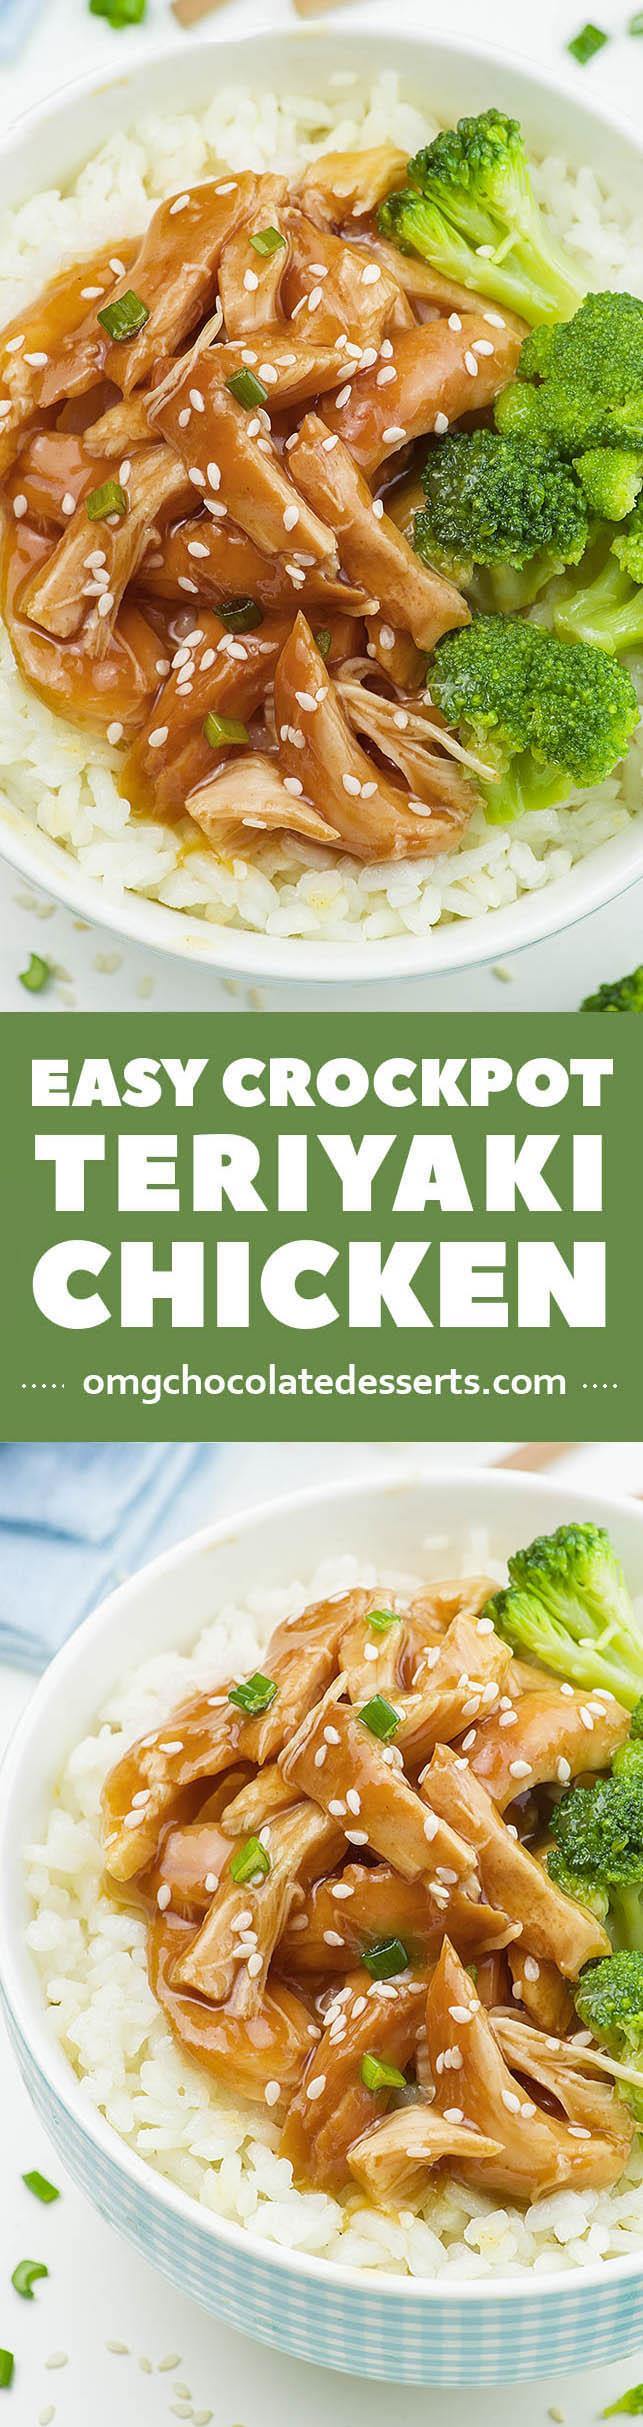 Need an idea for cheap and easy weeknight dinner recipe? Easy Crockpot Teriyaki Chicken in homemade sauce with garlic, honey and soy sauce, served with broccoli and rice as a side, is definitely healthy and easy meal for your family.